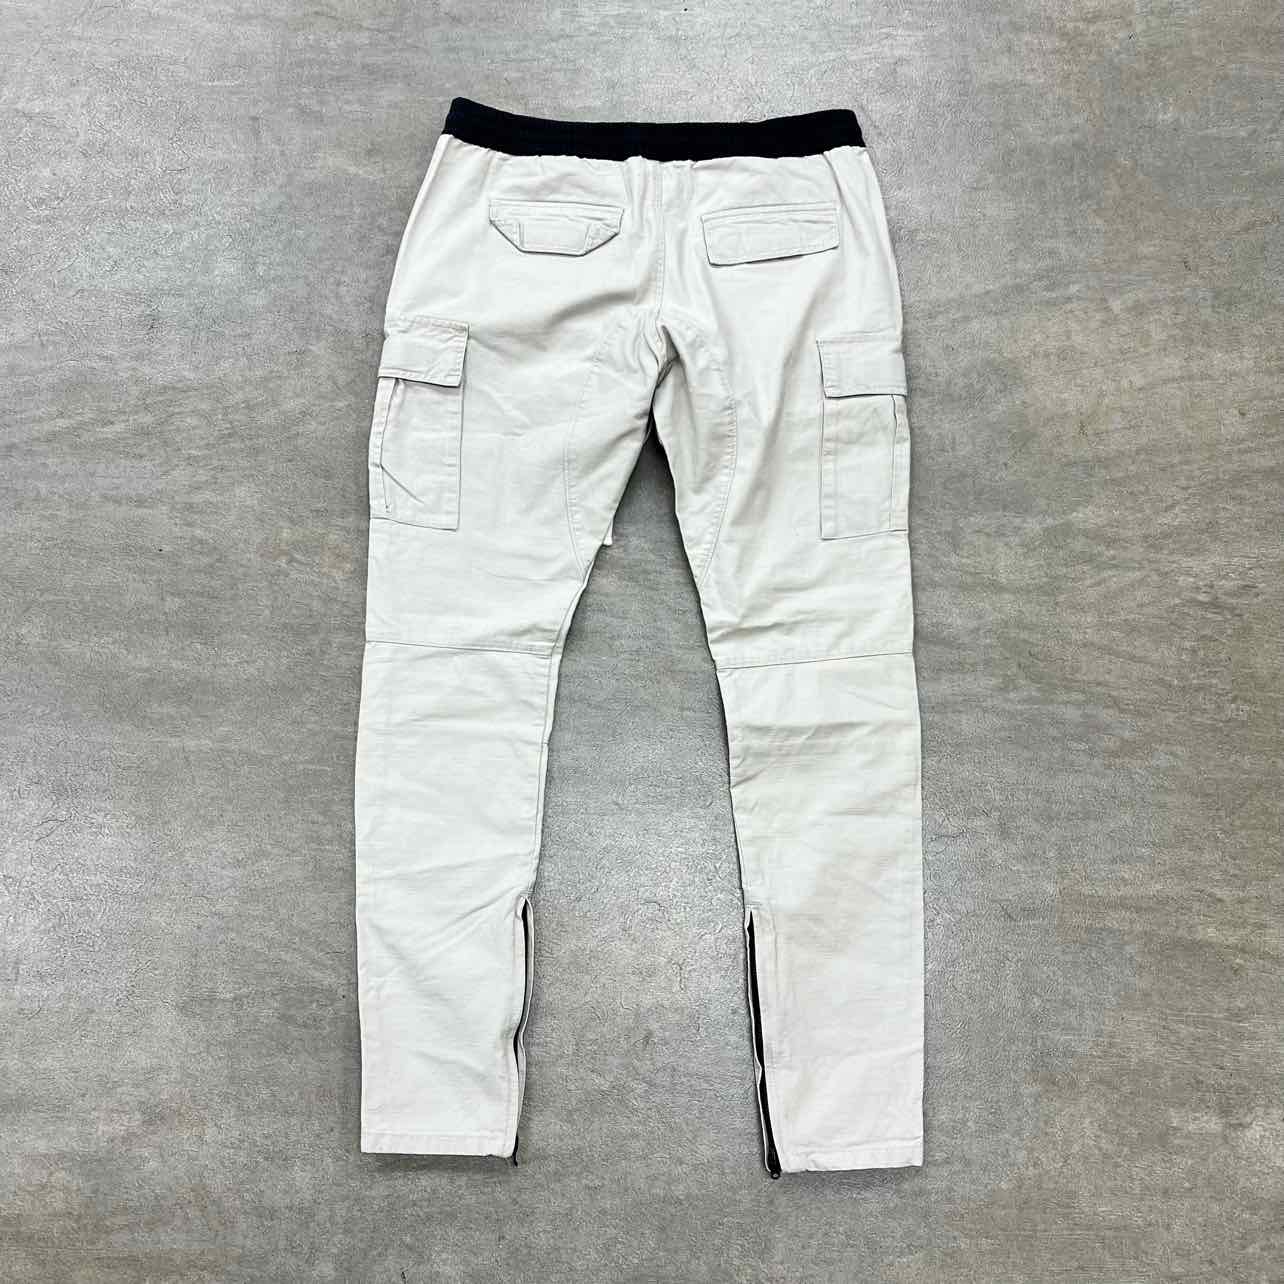 Fear of God Pants "ESSENTIALS" Beige Used Size XL